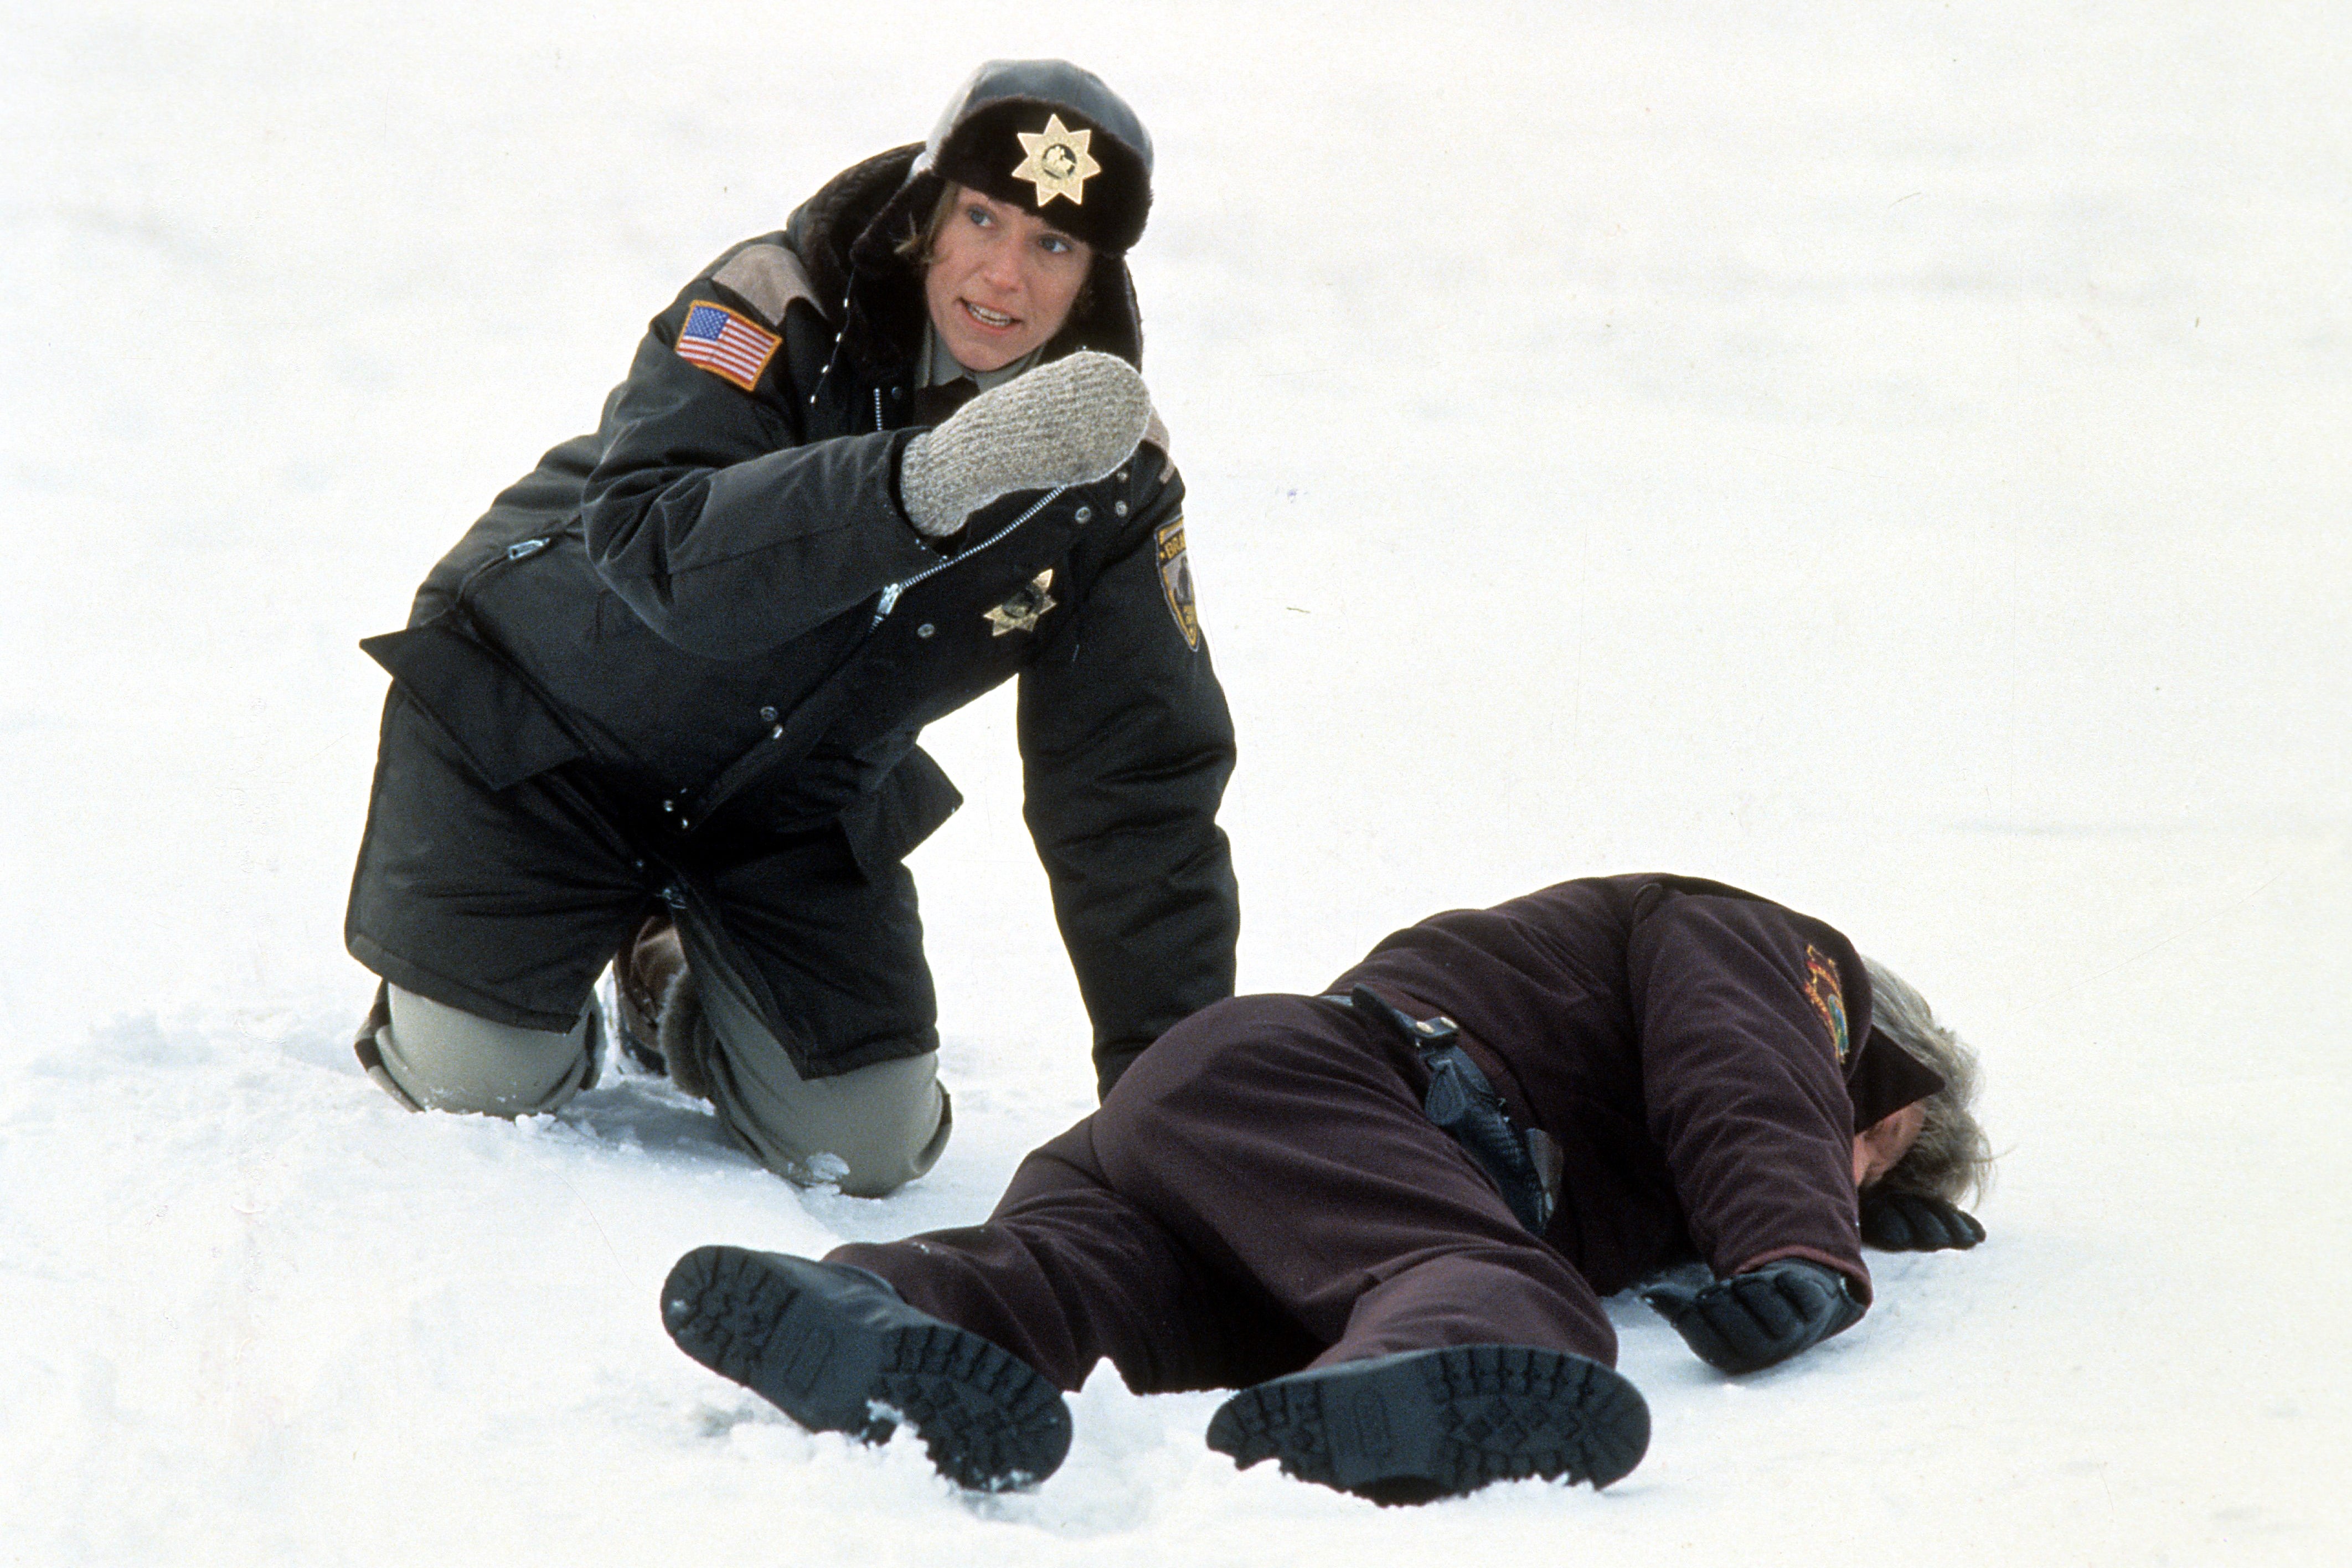 In a snowy field, a female police officer, wearing a winter uniform, kneels over the body of another police officer lying on the ground while looking off screen to something or someone else. 